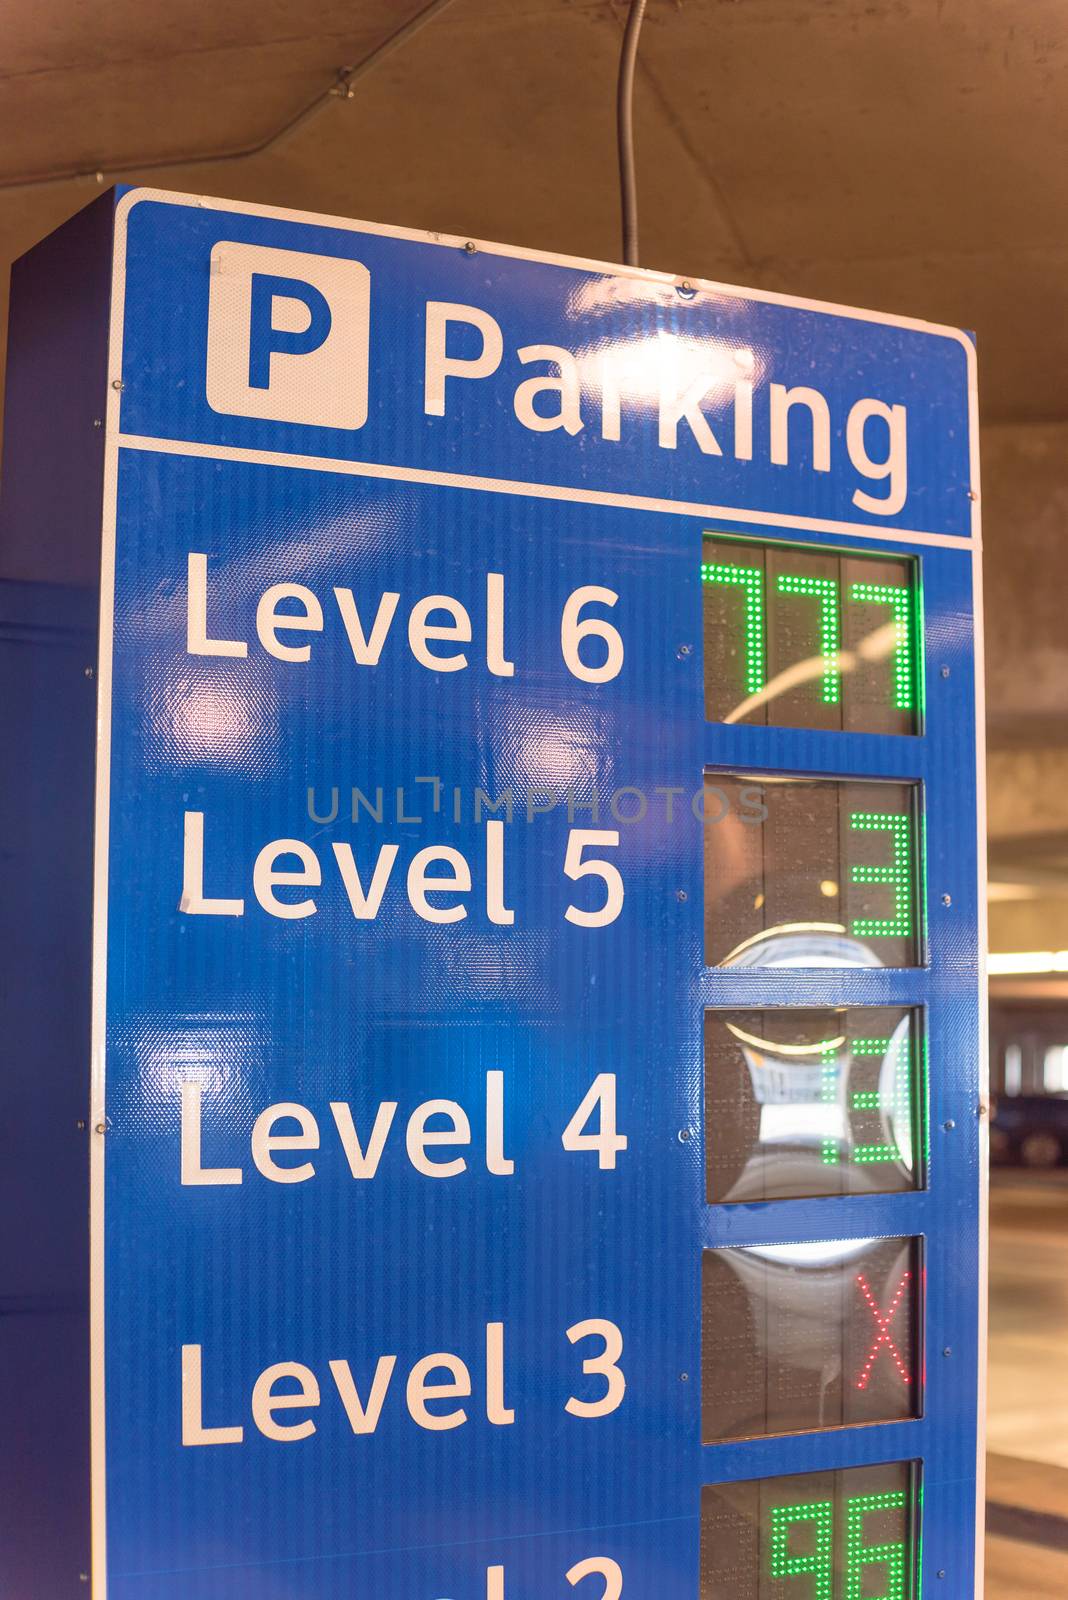 Multi-level garage smart guidance system with LED lighted numbers showing available or full spaces on each level. Intelligent indoor parking garage management